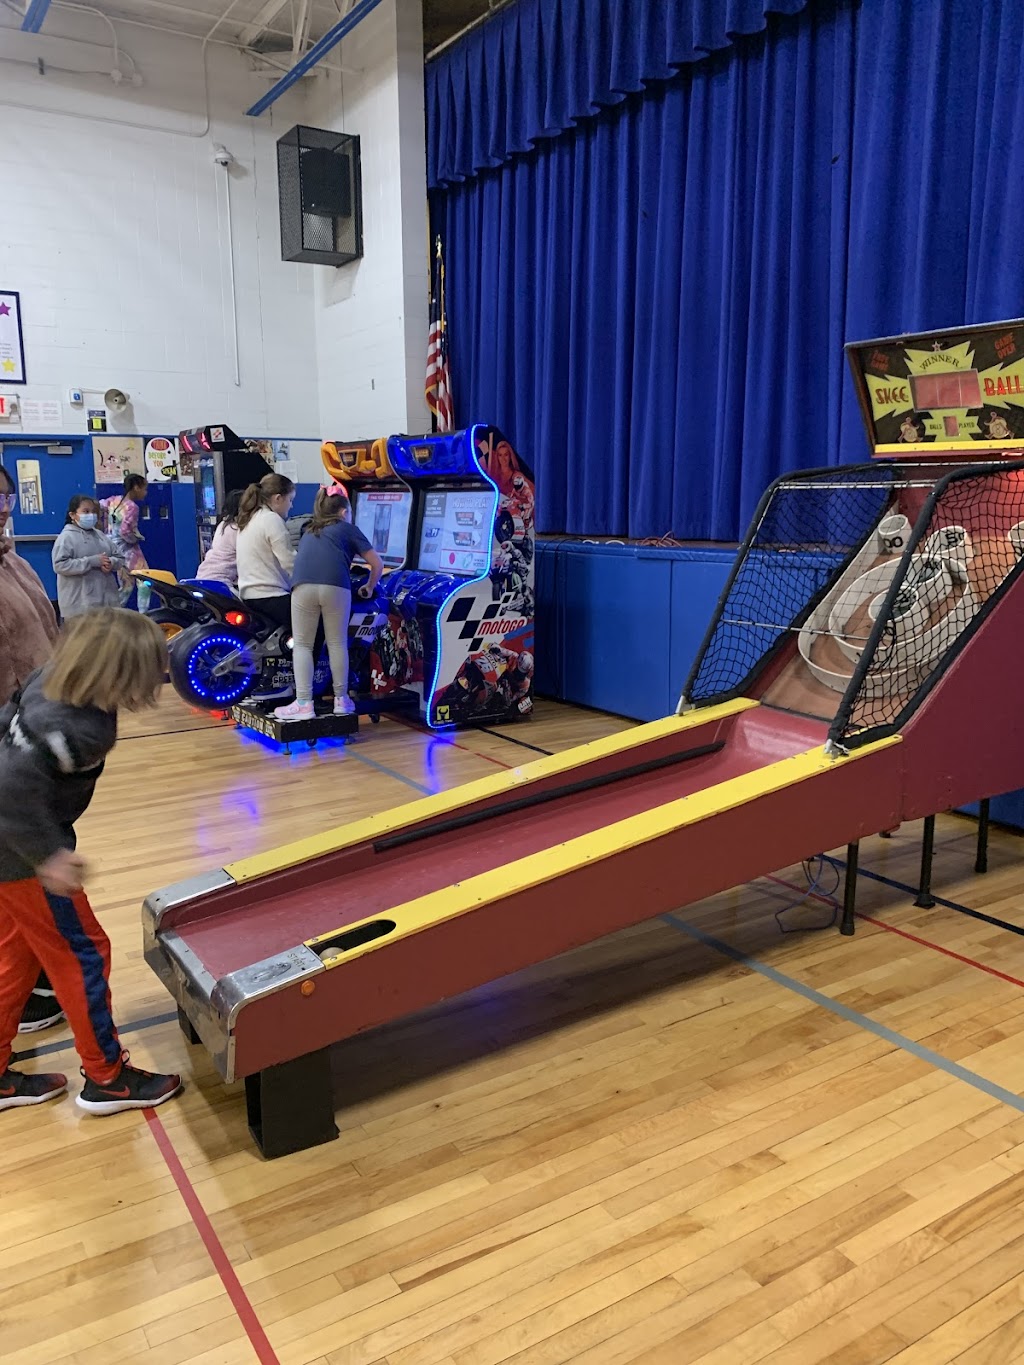 Funtime Amusements Inc | 410 Union Valley Rd, Mahopac, NY 10541 | Phone: (914) 773-1320